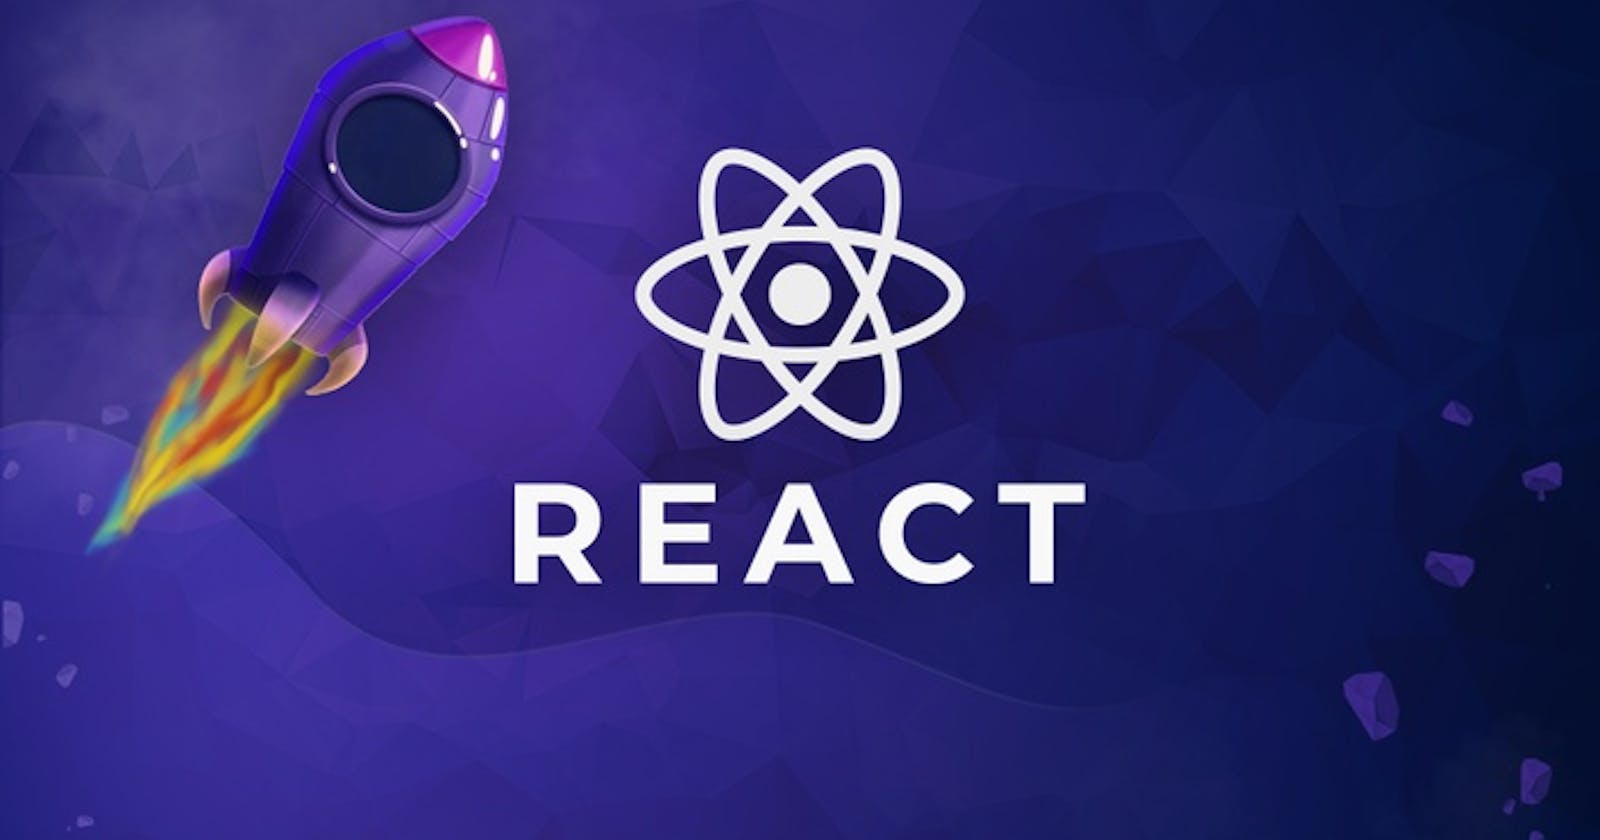 React State Management